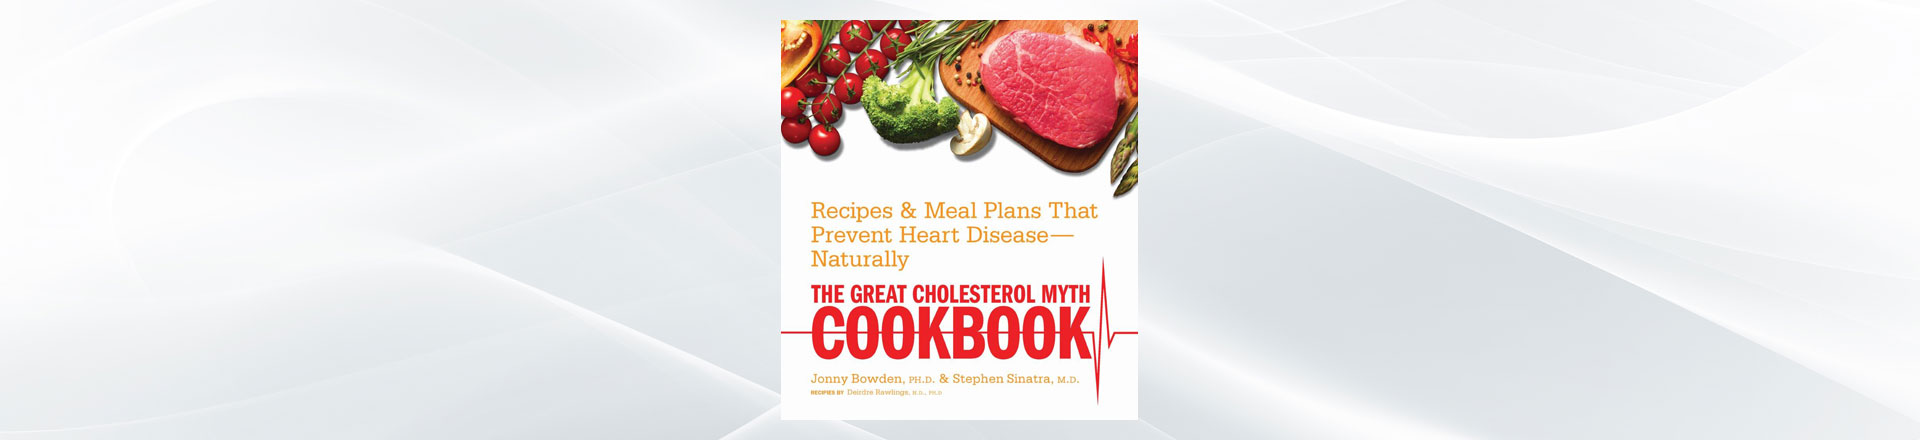 Learn to prevent or reverse heart disease with food through The Great Cholesterol Myth Cookbook